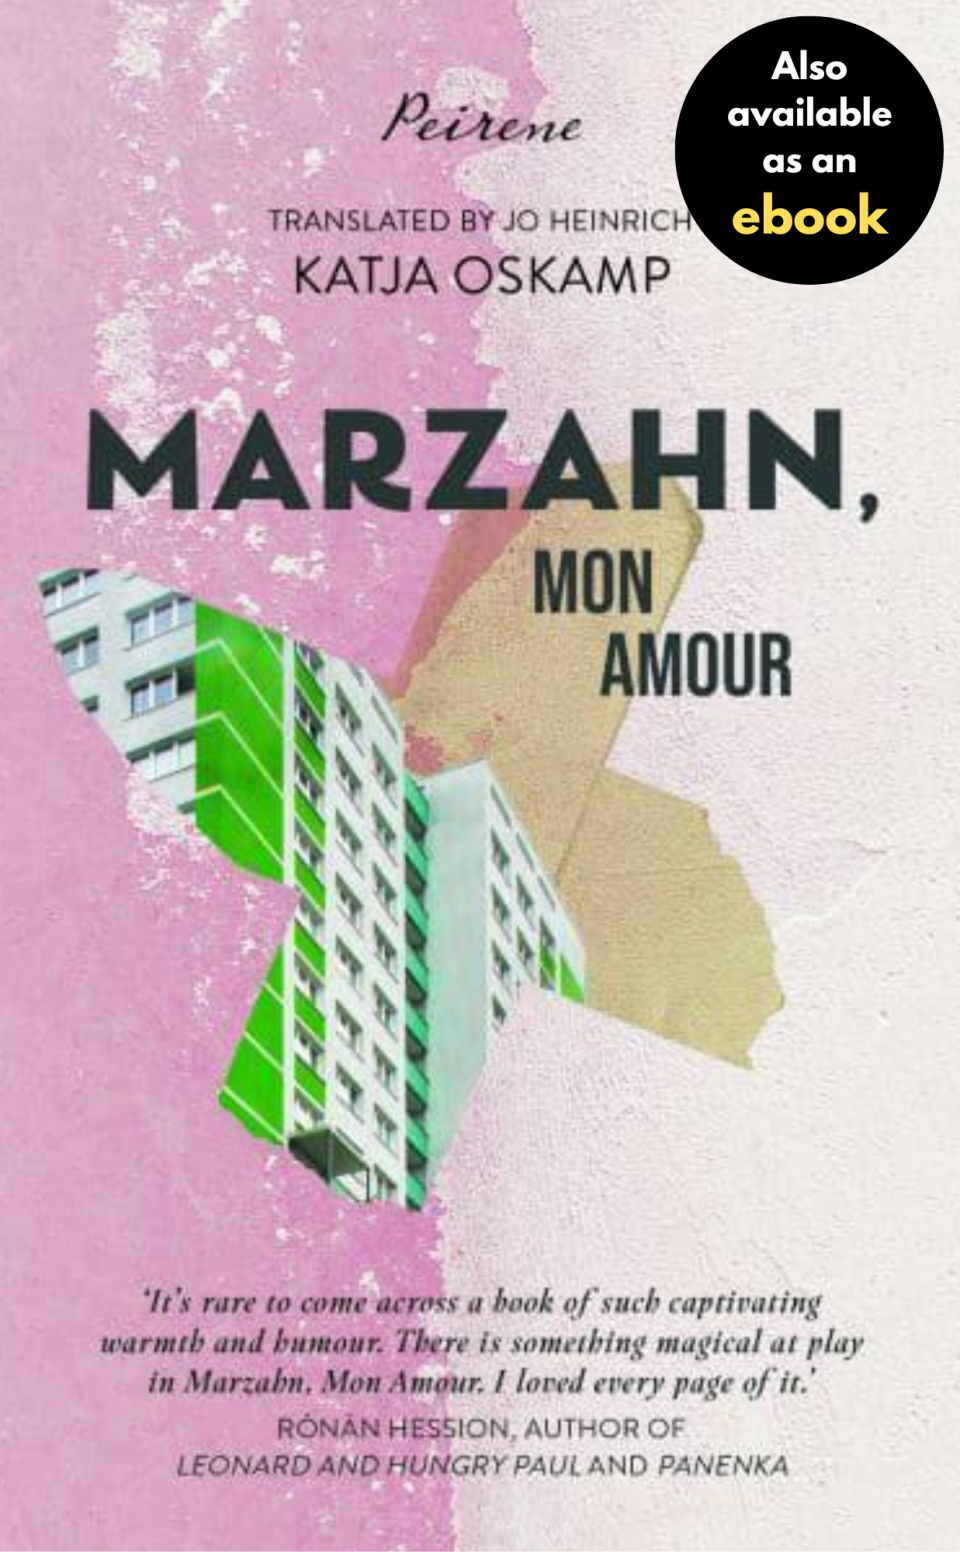 Shows the cover art for Marzahn, Mon Amour by Katja Oskamp